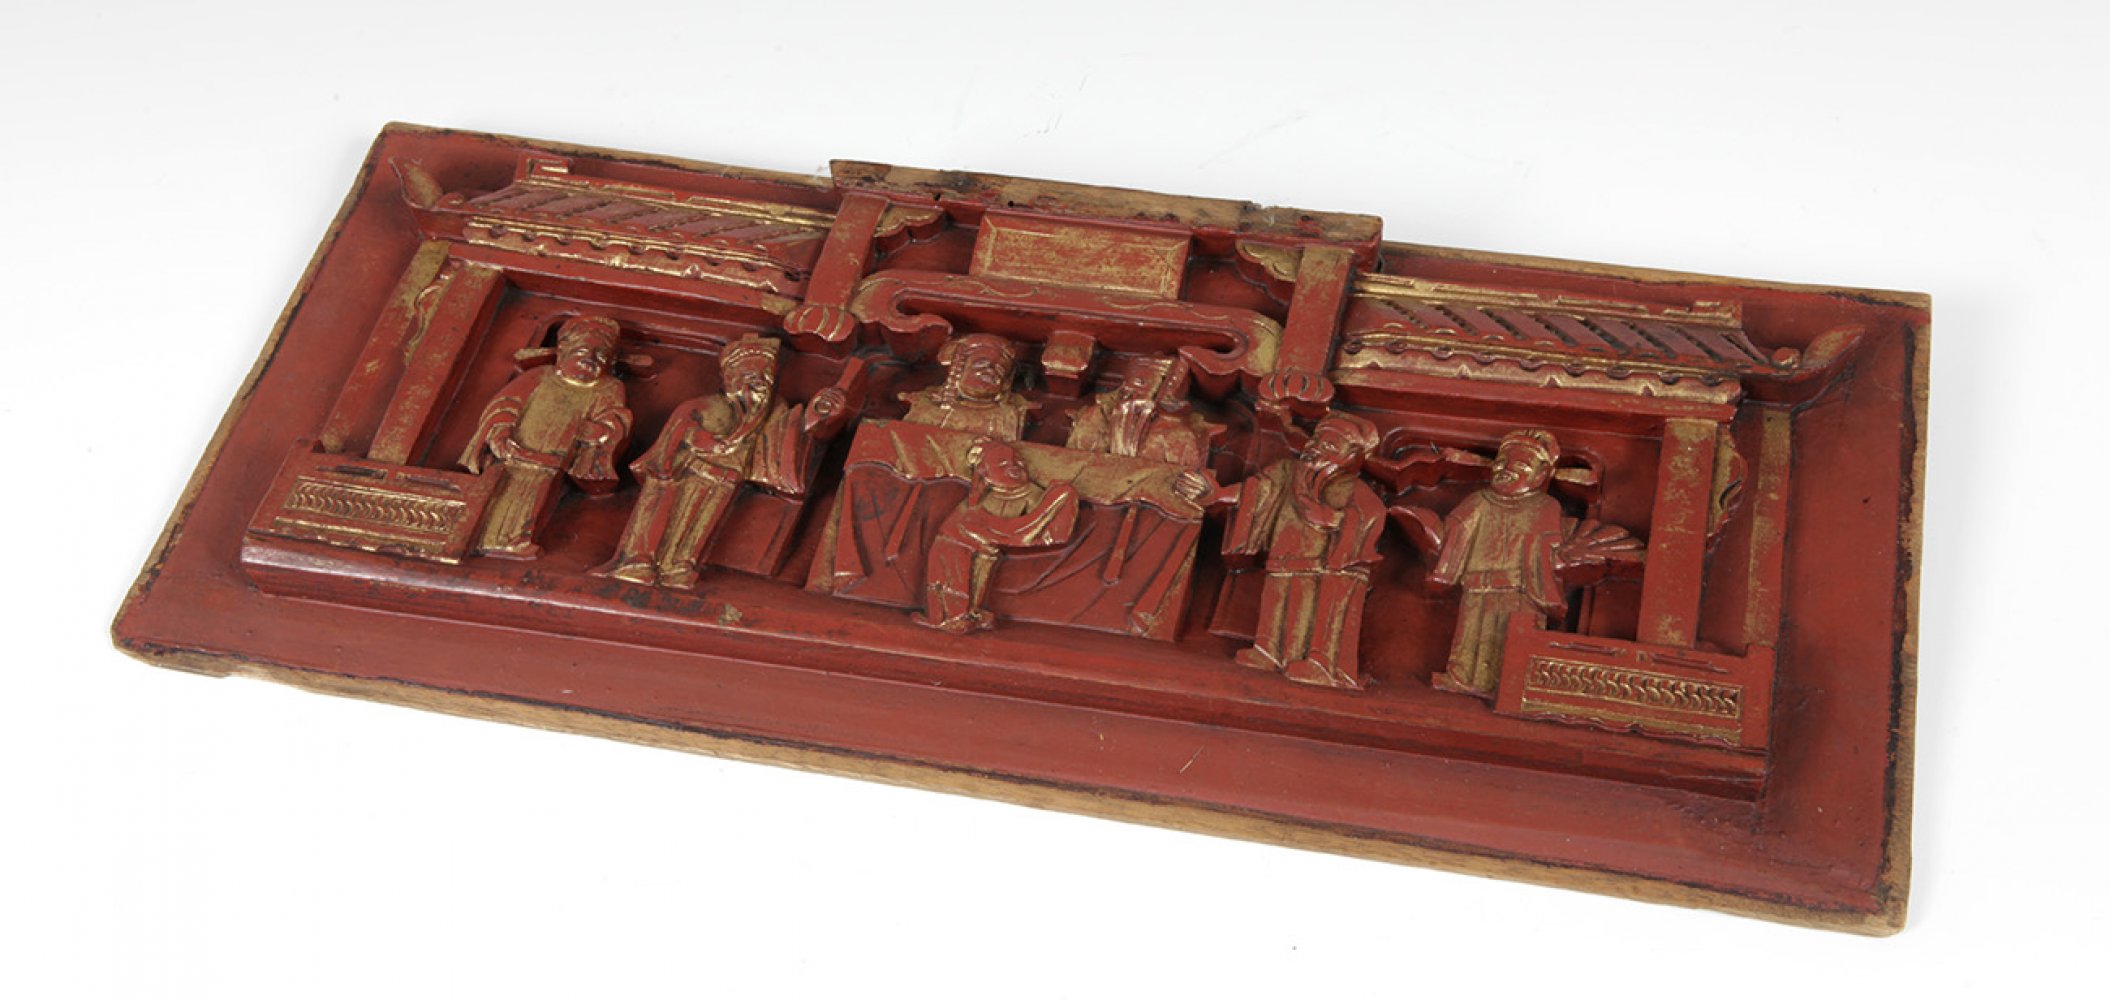 Ornamental frieze; China, Qing dynasty, 19th century.Carved and lacquered wood.Size: 17 x 38 x 2